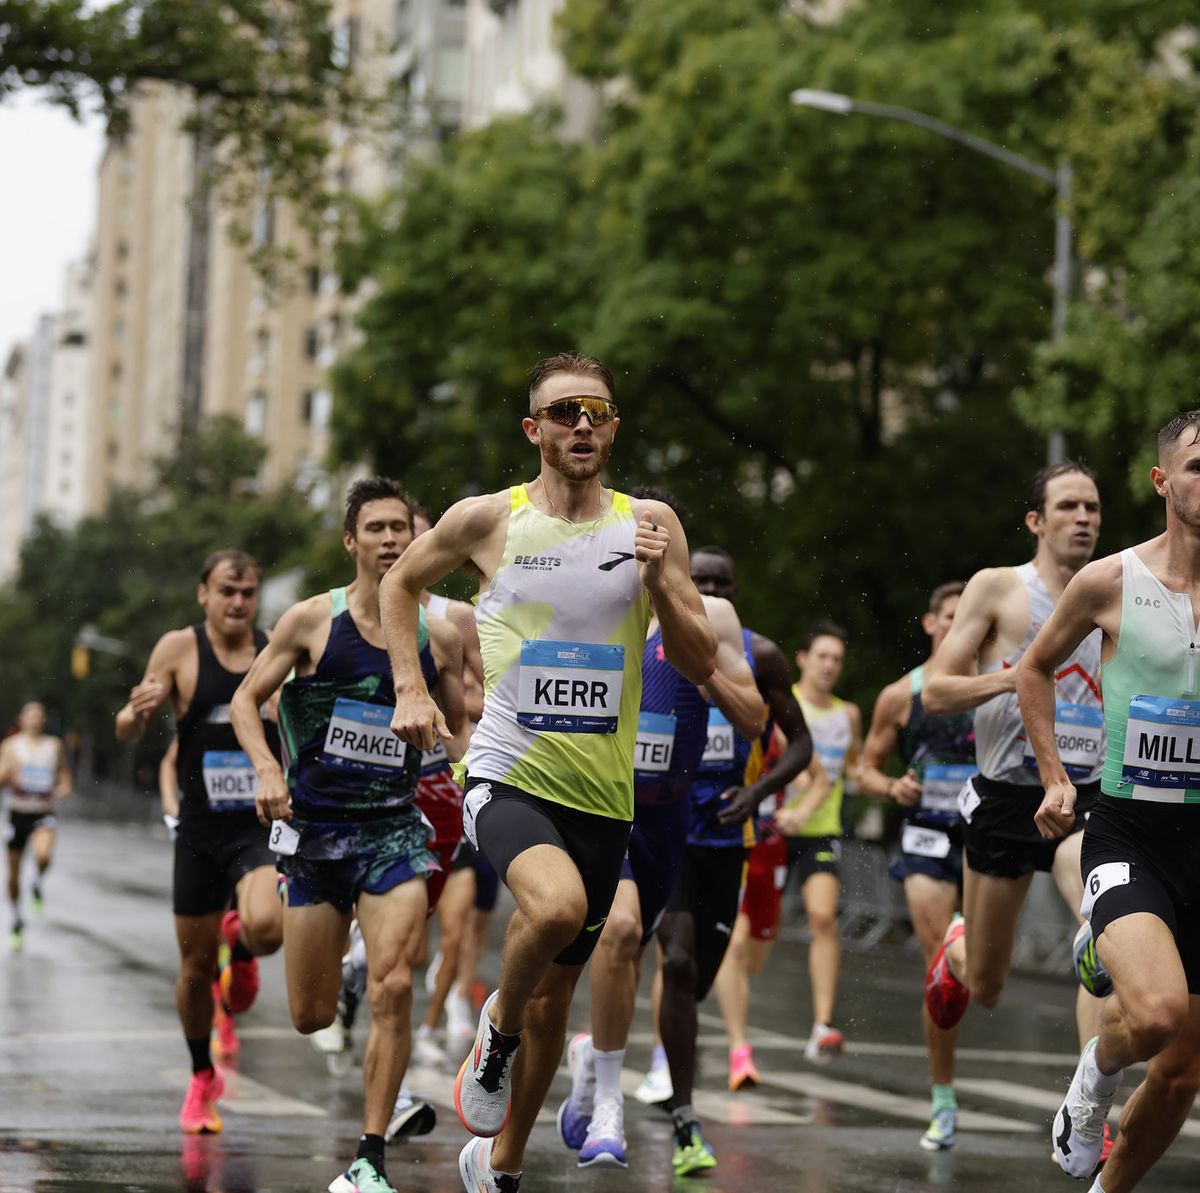 5 Fast Facts About the 5th Avenue Mile